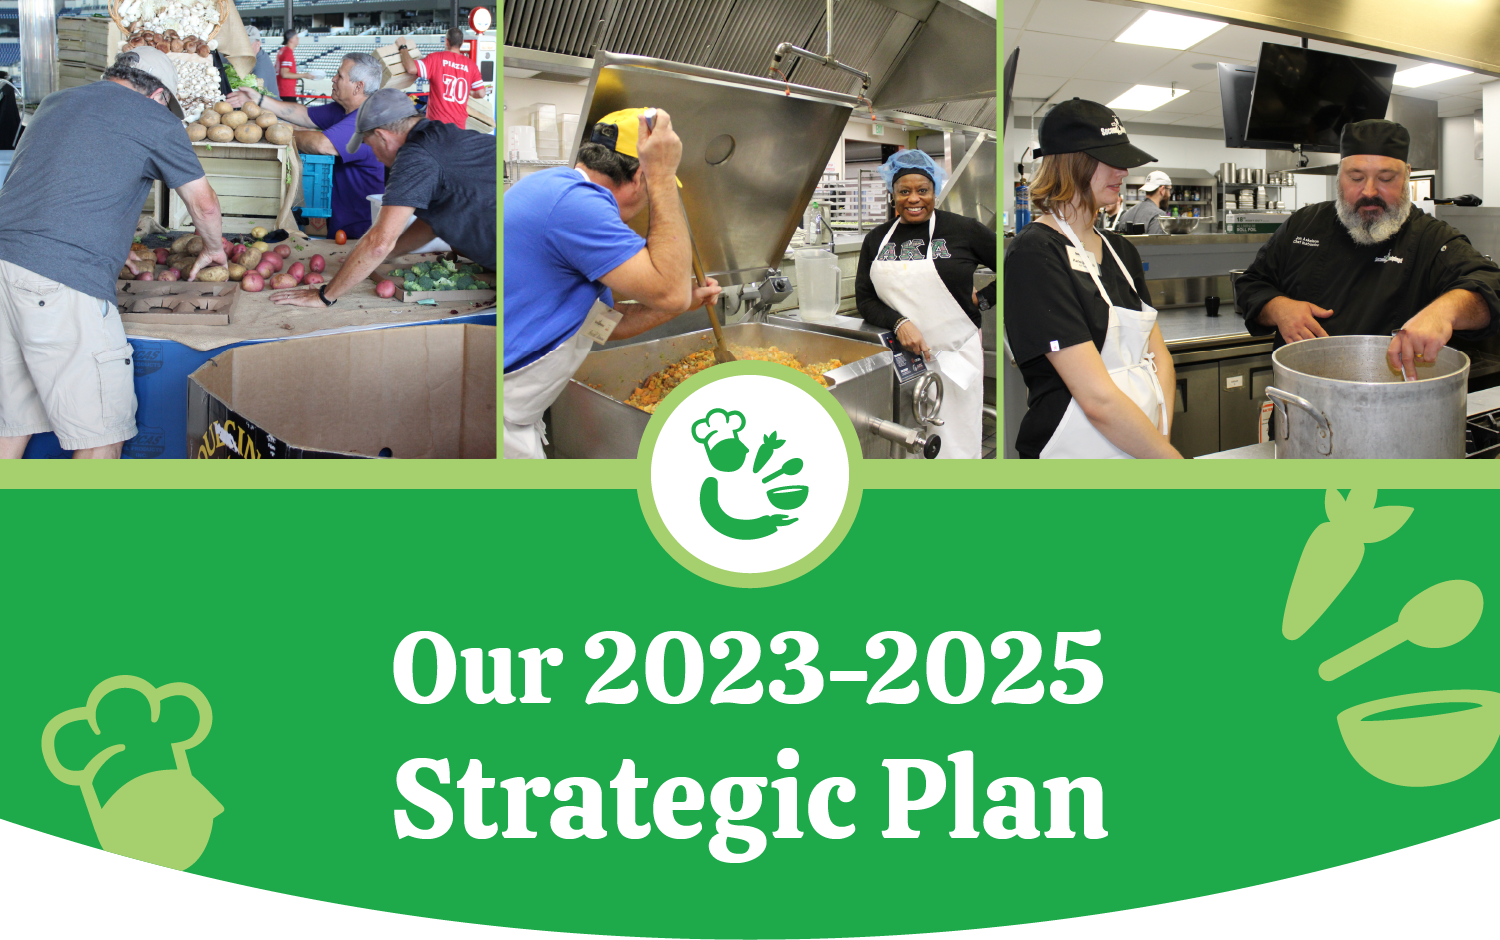 Less Waste. Less Hunger. More Opportunities. Take a Look at Our 2023-2025 Strategic Plan.